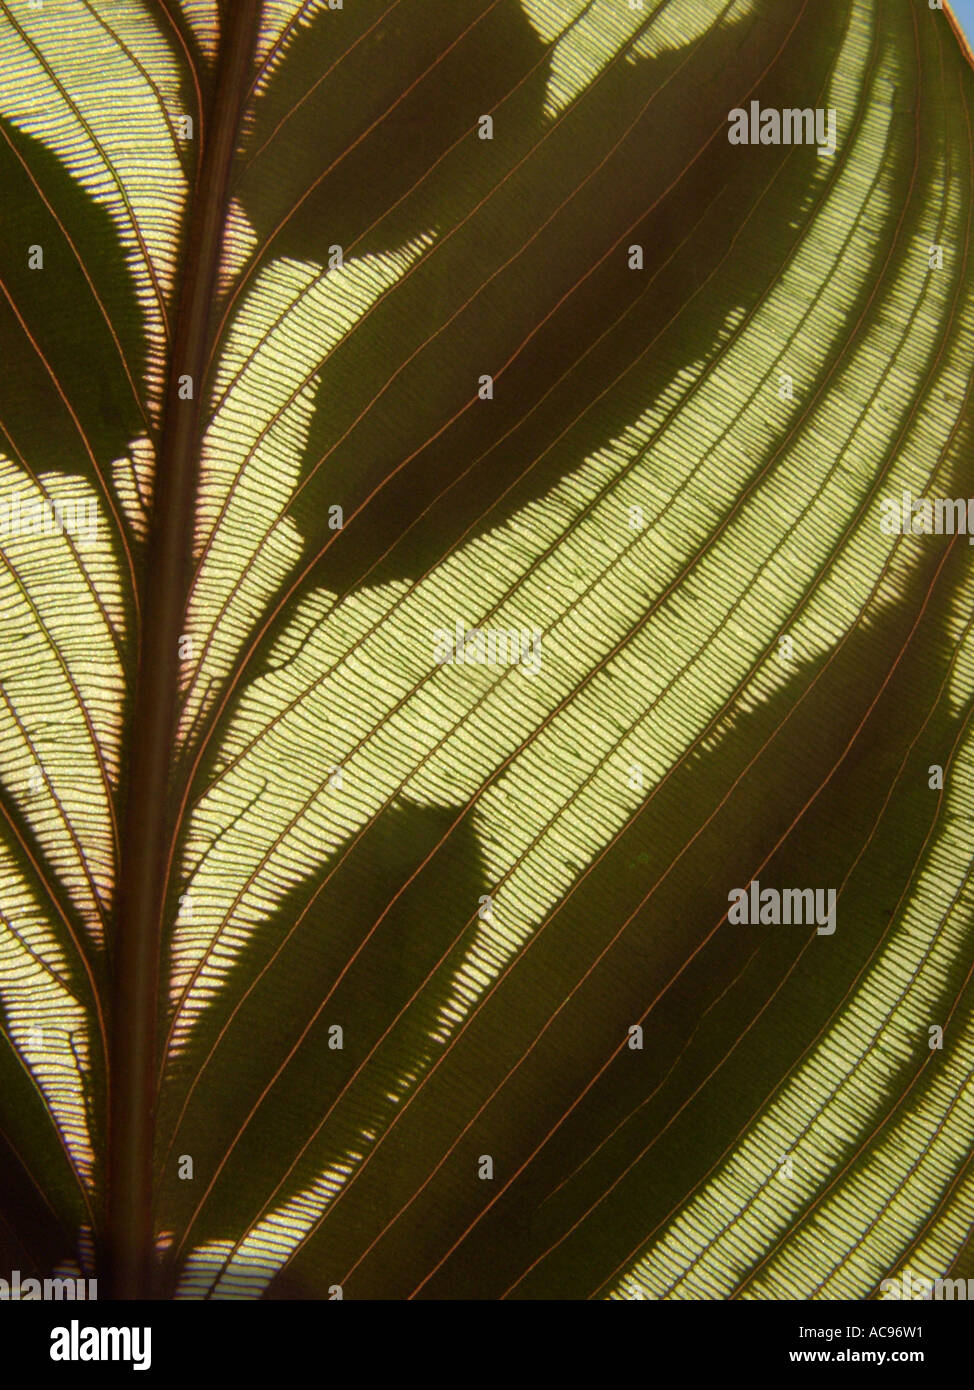 Peacock Plant (Calathea makoyana), part of a leaf in backlight Stock Photo